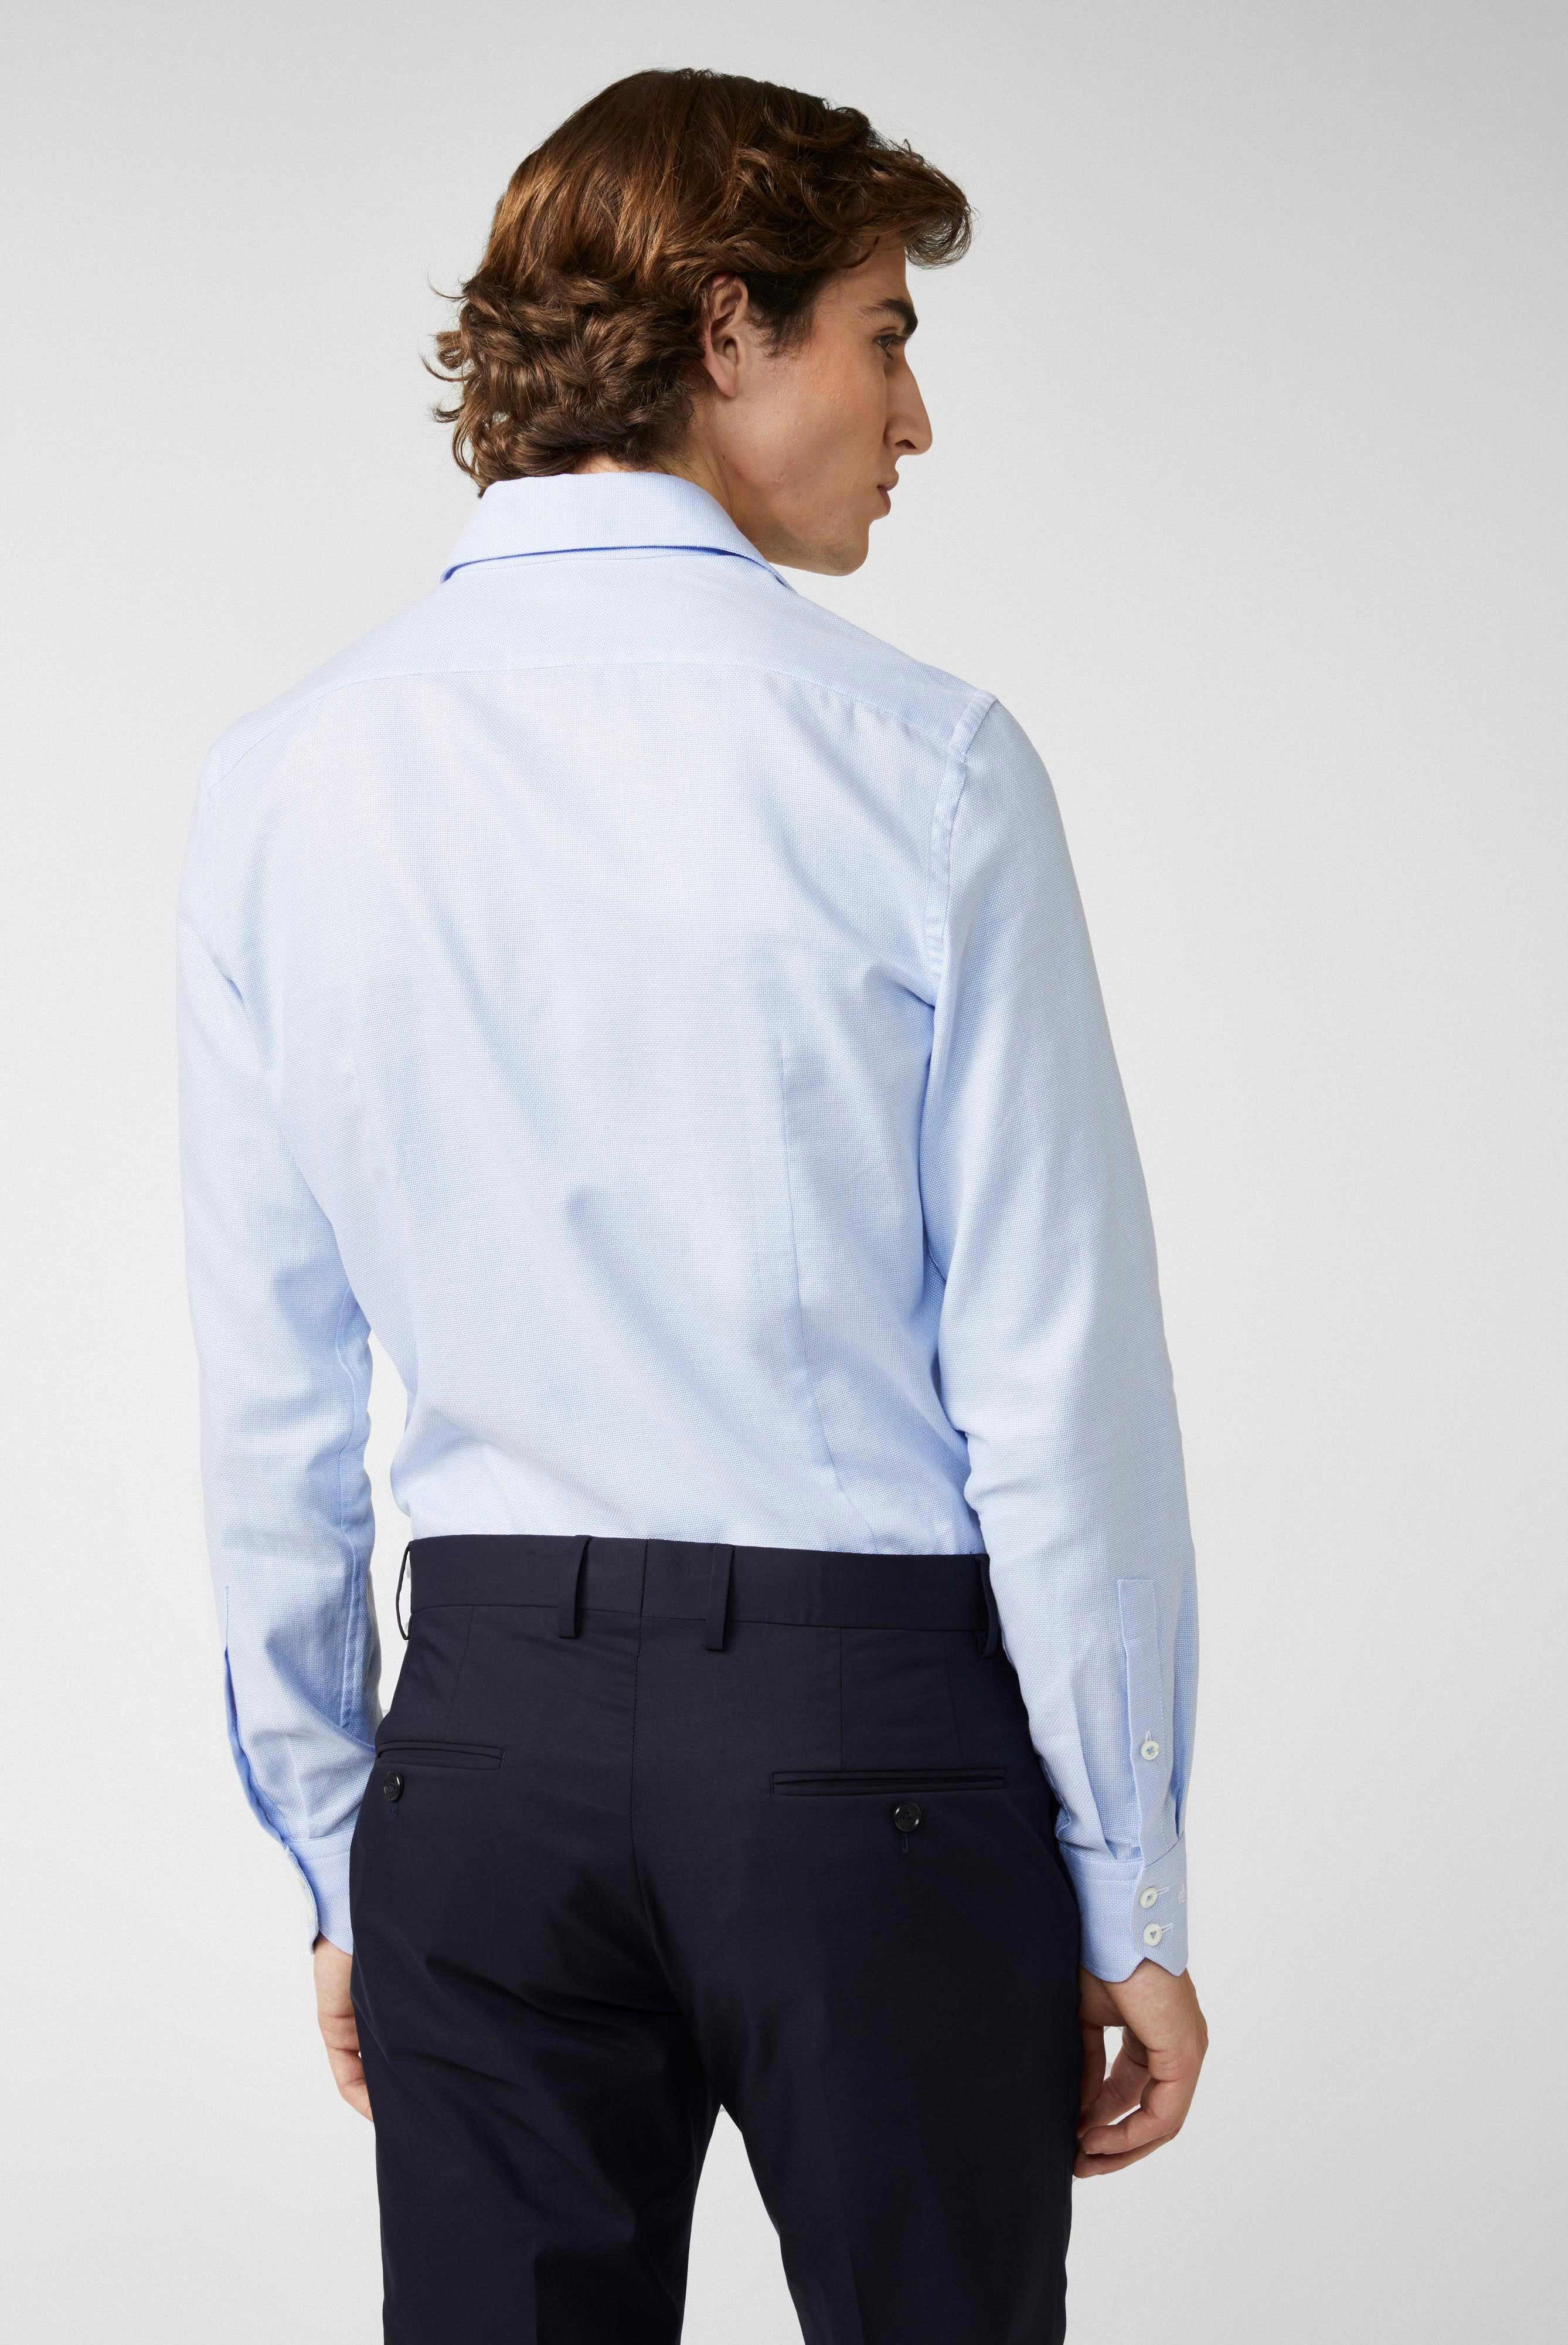 Business Shirts+Business shirt made of dobby cotton+20.3283.NV.161680.730.40